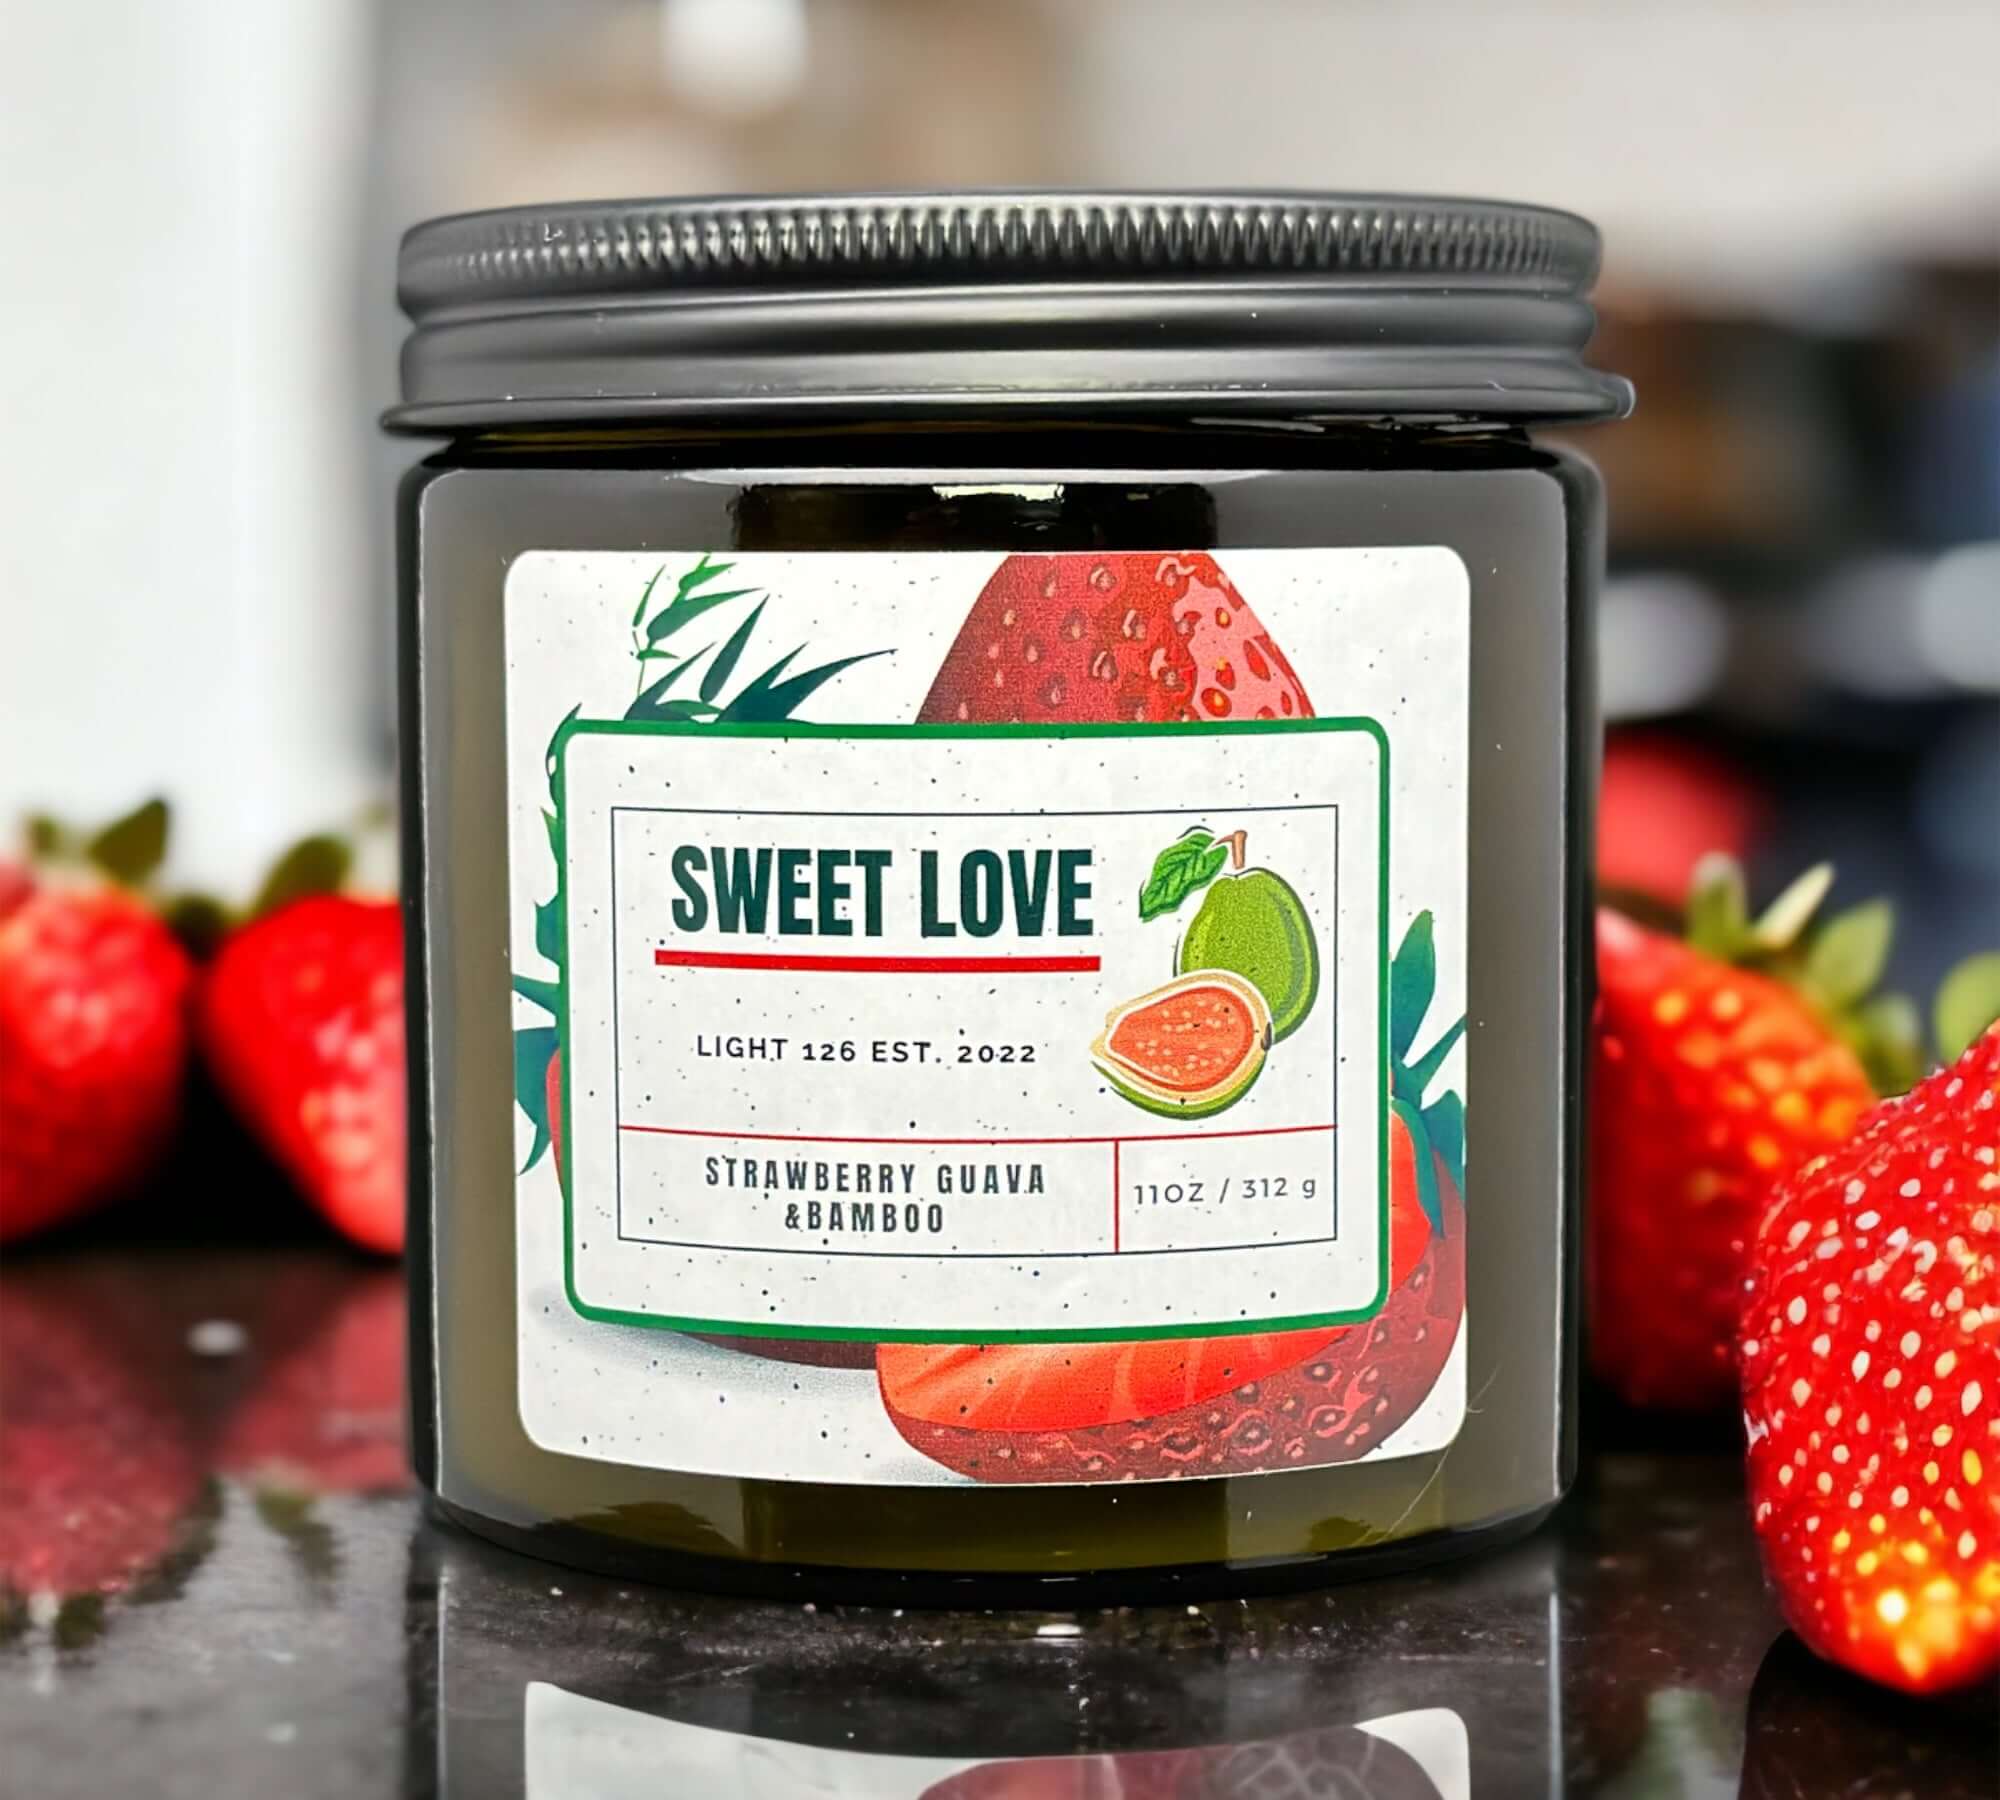 Sweet love candle. Strawberry Guava and bamboo candle.